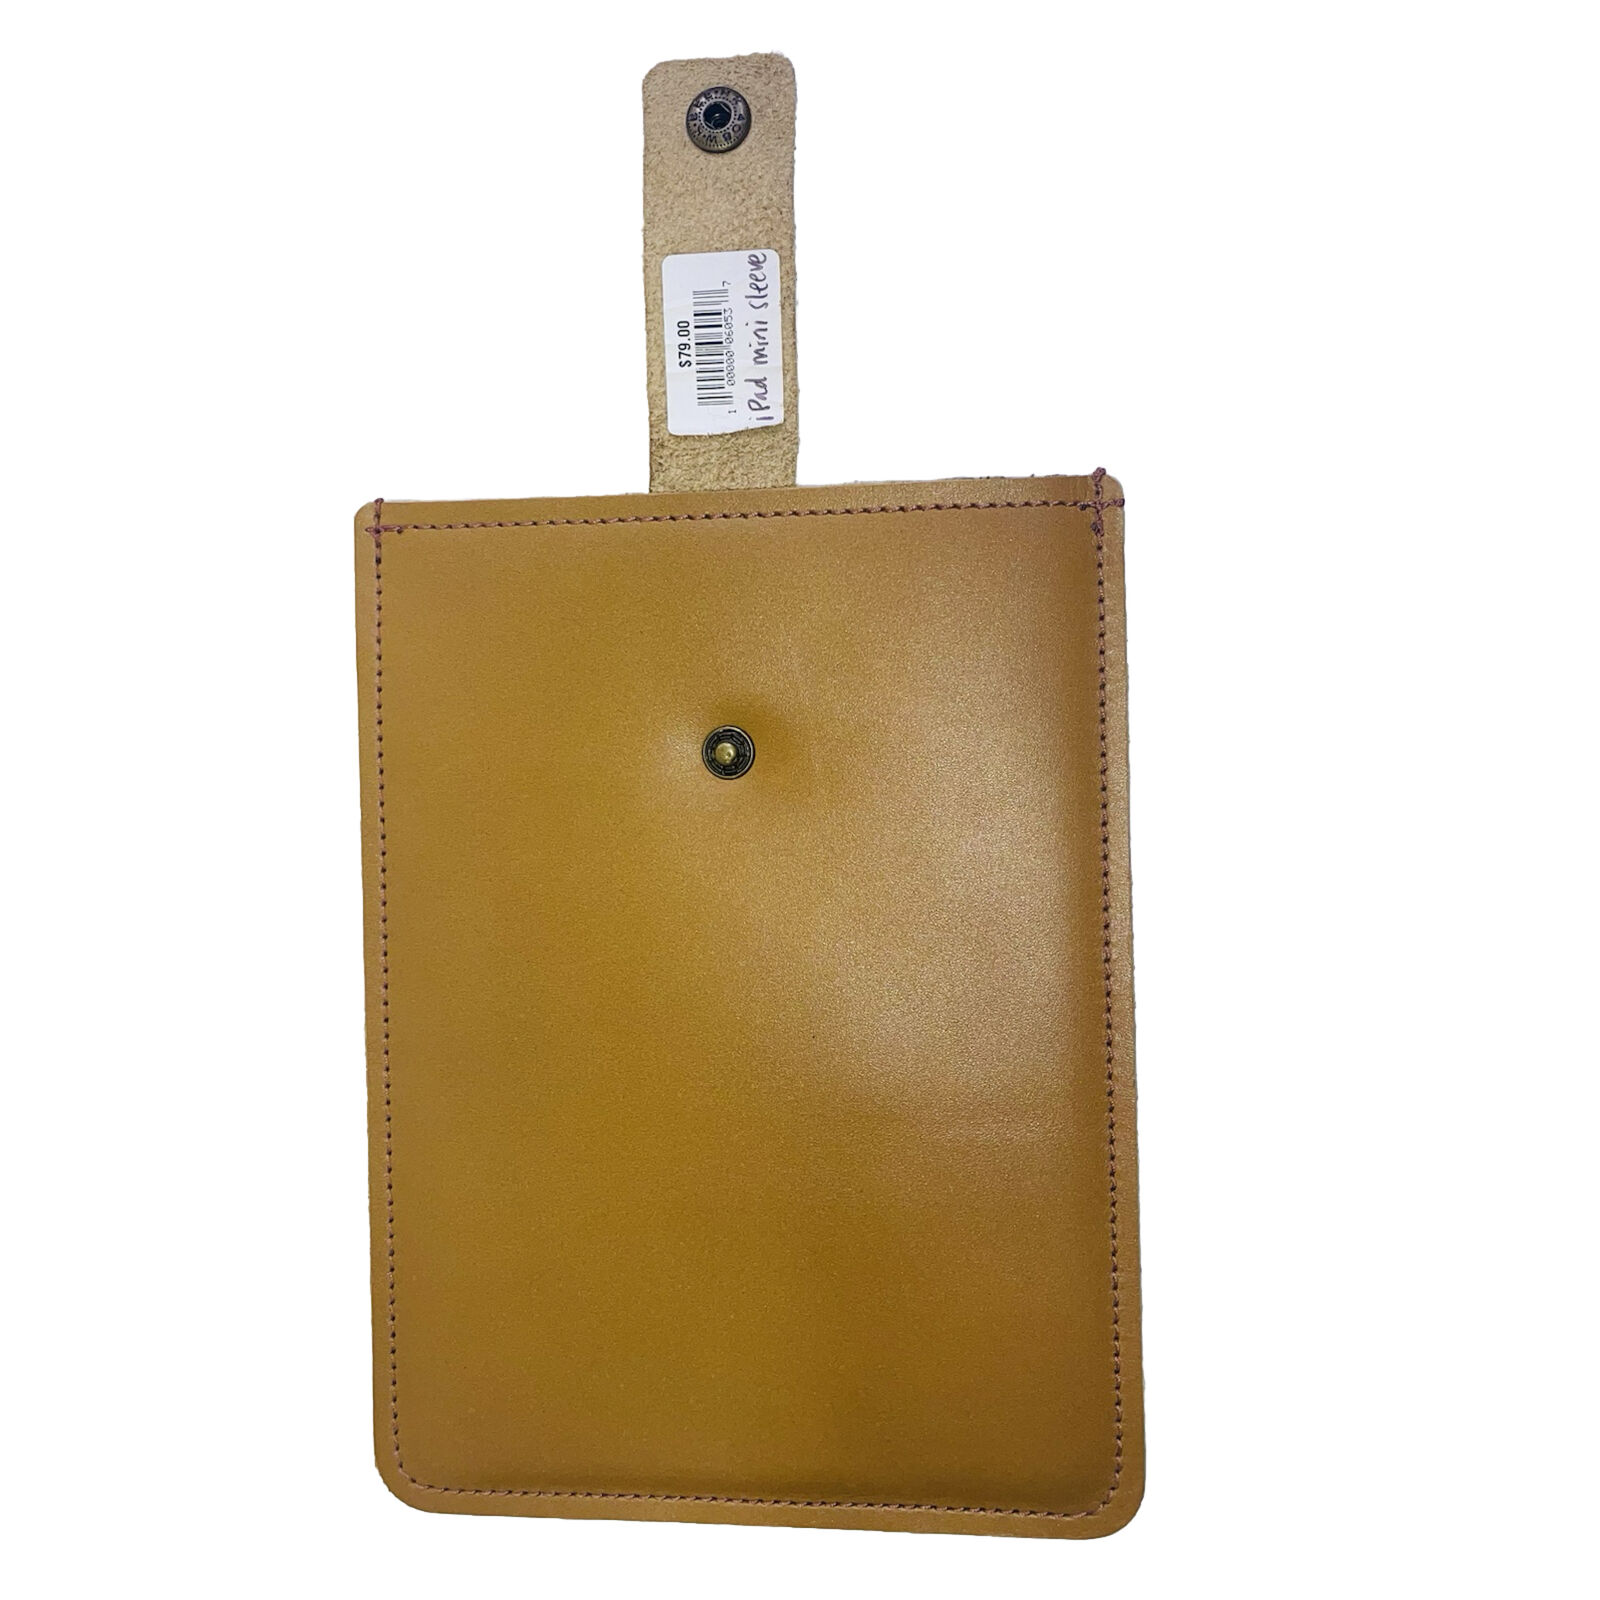 Hand Made Leather ipad Mini (4 & 5) Cover Great Quality Leather